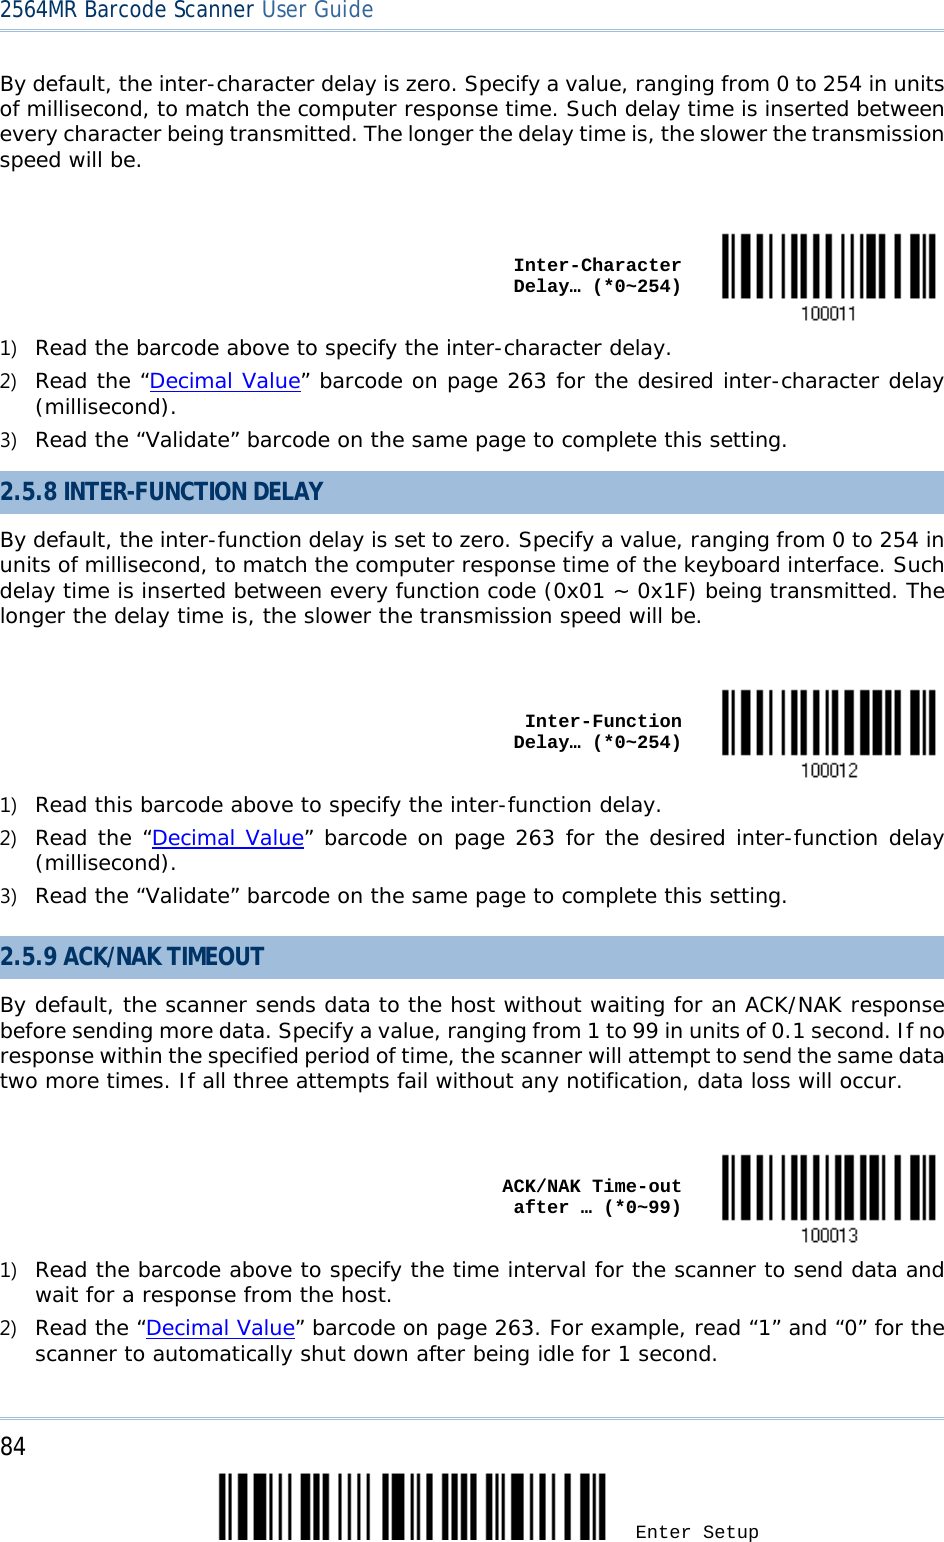 2564MR Barcode Scanner User Guide  By default, the inter-character delay is zero. Specify a value, ranging from 0 to 254 in units of millisecond, to match the computer response time. Such delay time is inserted between every character being transmitted. The longer the delay time is, the slower the transmission speed will be.     Inter-Character Delay… (*0~254)  1) Read the barcode above to specify the inter-character delay. 2) Read the “Decimal Value” barcode on page 263 for the desired inter-character delay (millisecond).  3) Read the “Validate” barcode on the same page to complete this setting. 2.5.8 INTER-FUNCTION DELAY By default, the inter-function delay is set to zero. Specify a value, ranging from 0 to 254 in units of millisecond, to match the computer response time of the keyboard interface. Such delay time is inserted between every function code (0x01 ~ 0x1F) being transmitted. The longer the delay time is, the slower the transmission speed will be.     Inter-Function Delay… (*0~254)  1) Read this barcode above to specify the inter-function delay. 2) Read the “Decimal Value” barcode on page 263 for the desired inter-function delay (millisecond).  3) Read the “Validate” barcode on the same page to complete this setting.  2.5.9 ACK/NAK TIMEOUT By default, the scanner sends data to the host without waiting for an ACK/NAK response before sending more data. Specify a value, ranging from 1 to 99 in units of 0.1 second. If no response within the specified period of time, the scanner will attempt to send the same data two more times. If all three attempts fail without any notification, data loss will occur.     ACK/NAK Time-out after … (*0~99)  1) Read the barcode above to specify the time interval for the scanner to send data and wait for a response from the host. 2) Read the “Decimal Value” barcode on page 263. For example, read “1” and “0” for the scanner to automatically shut down after being idle for 1 second.  84 Enter Setup 